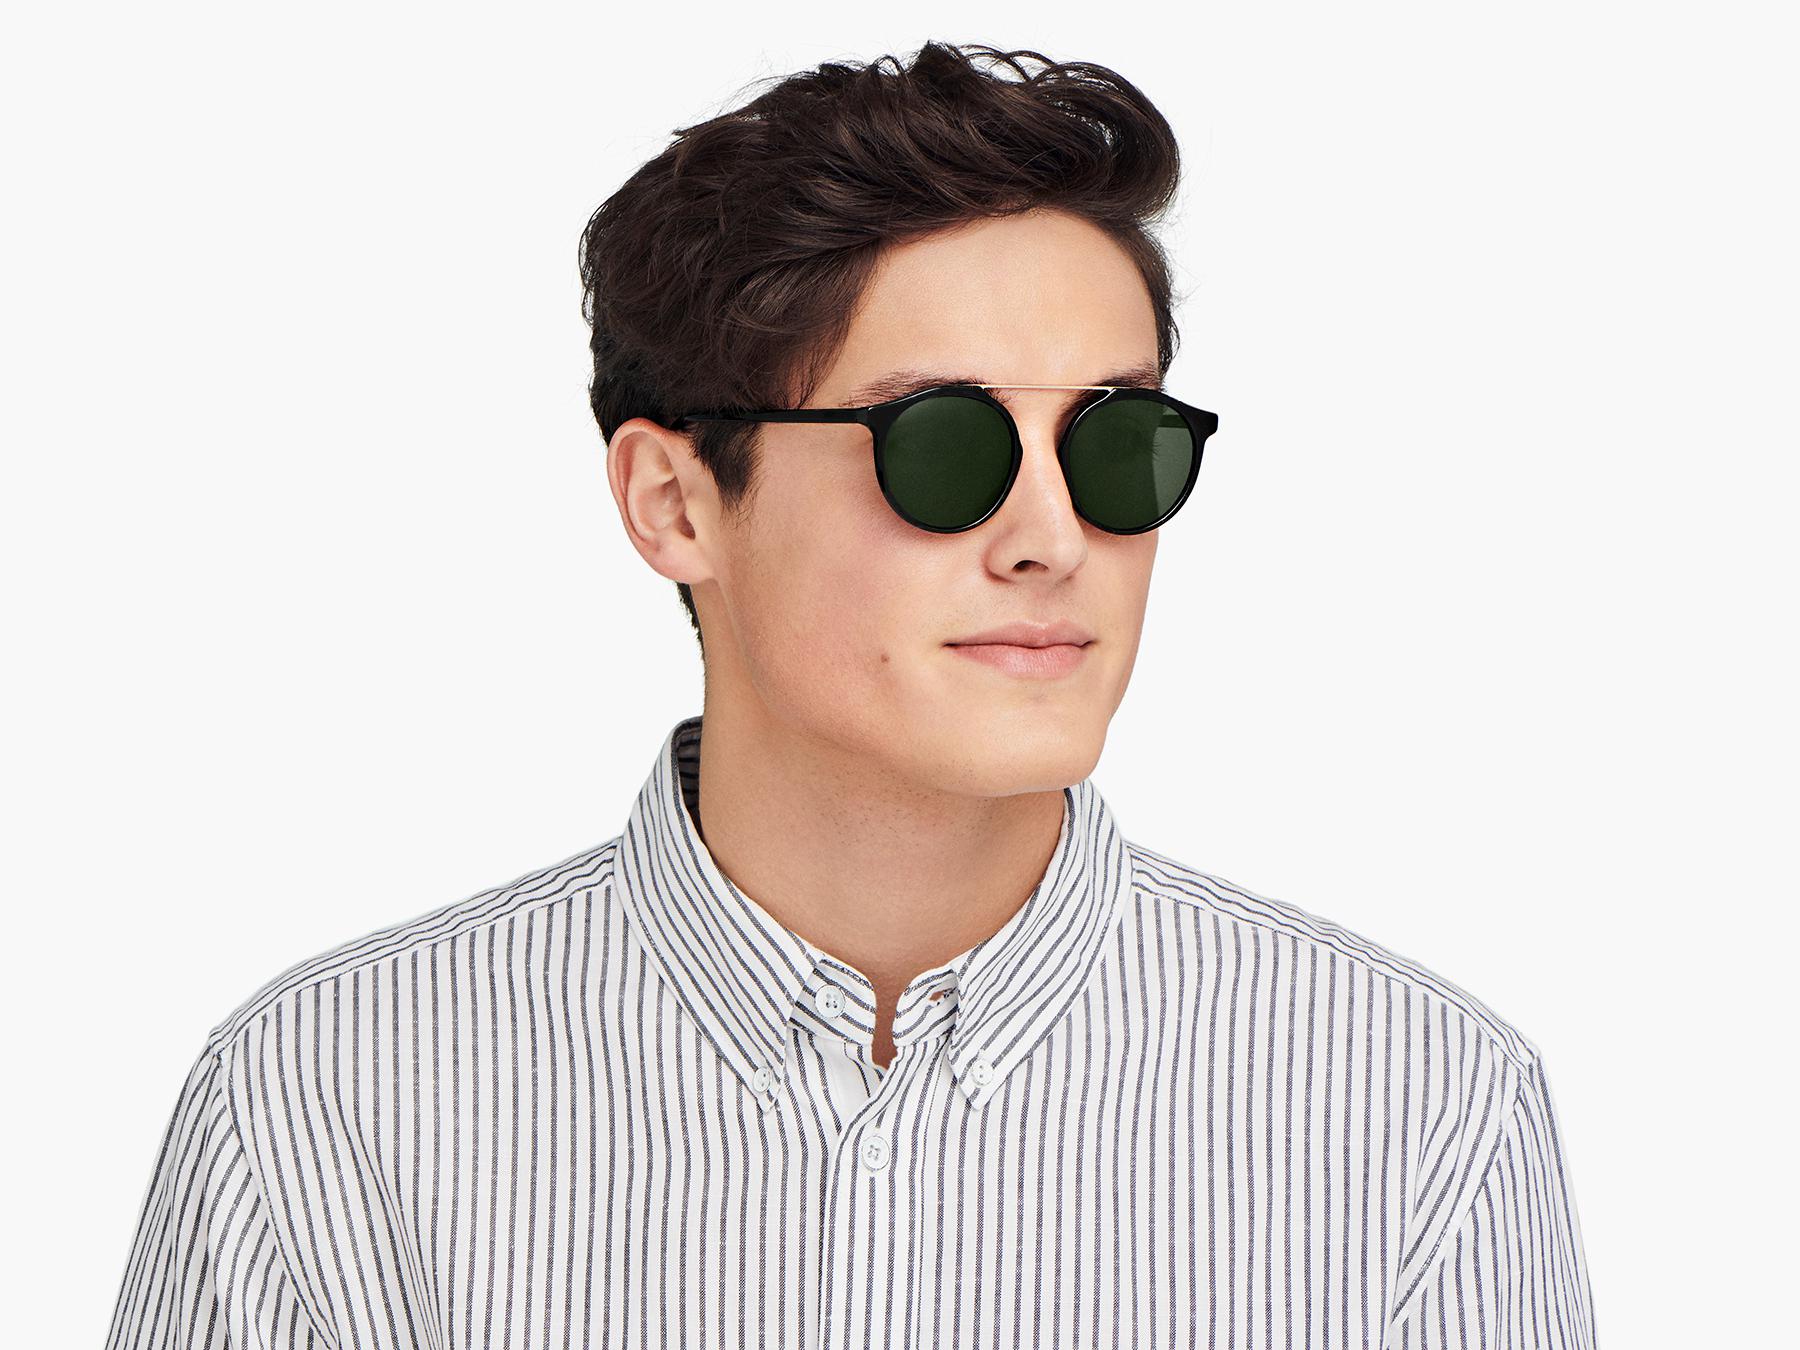 Cooper Sunglasses in Jet Black with Riesling | Warby Parker